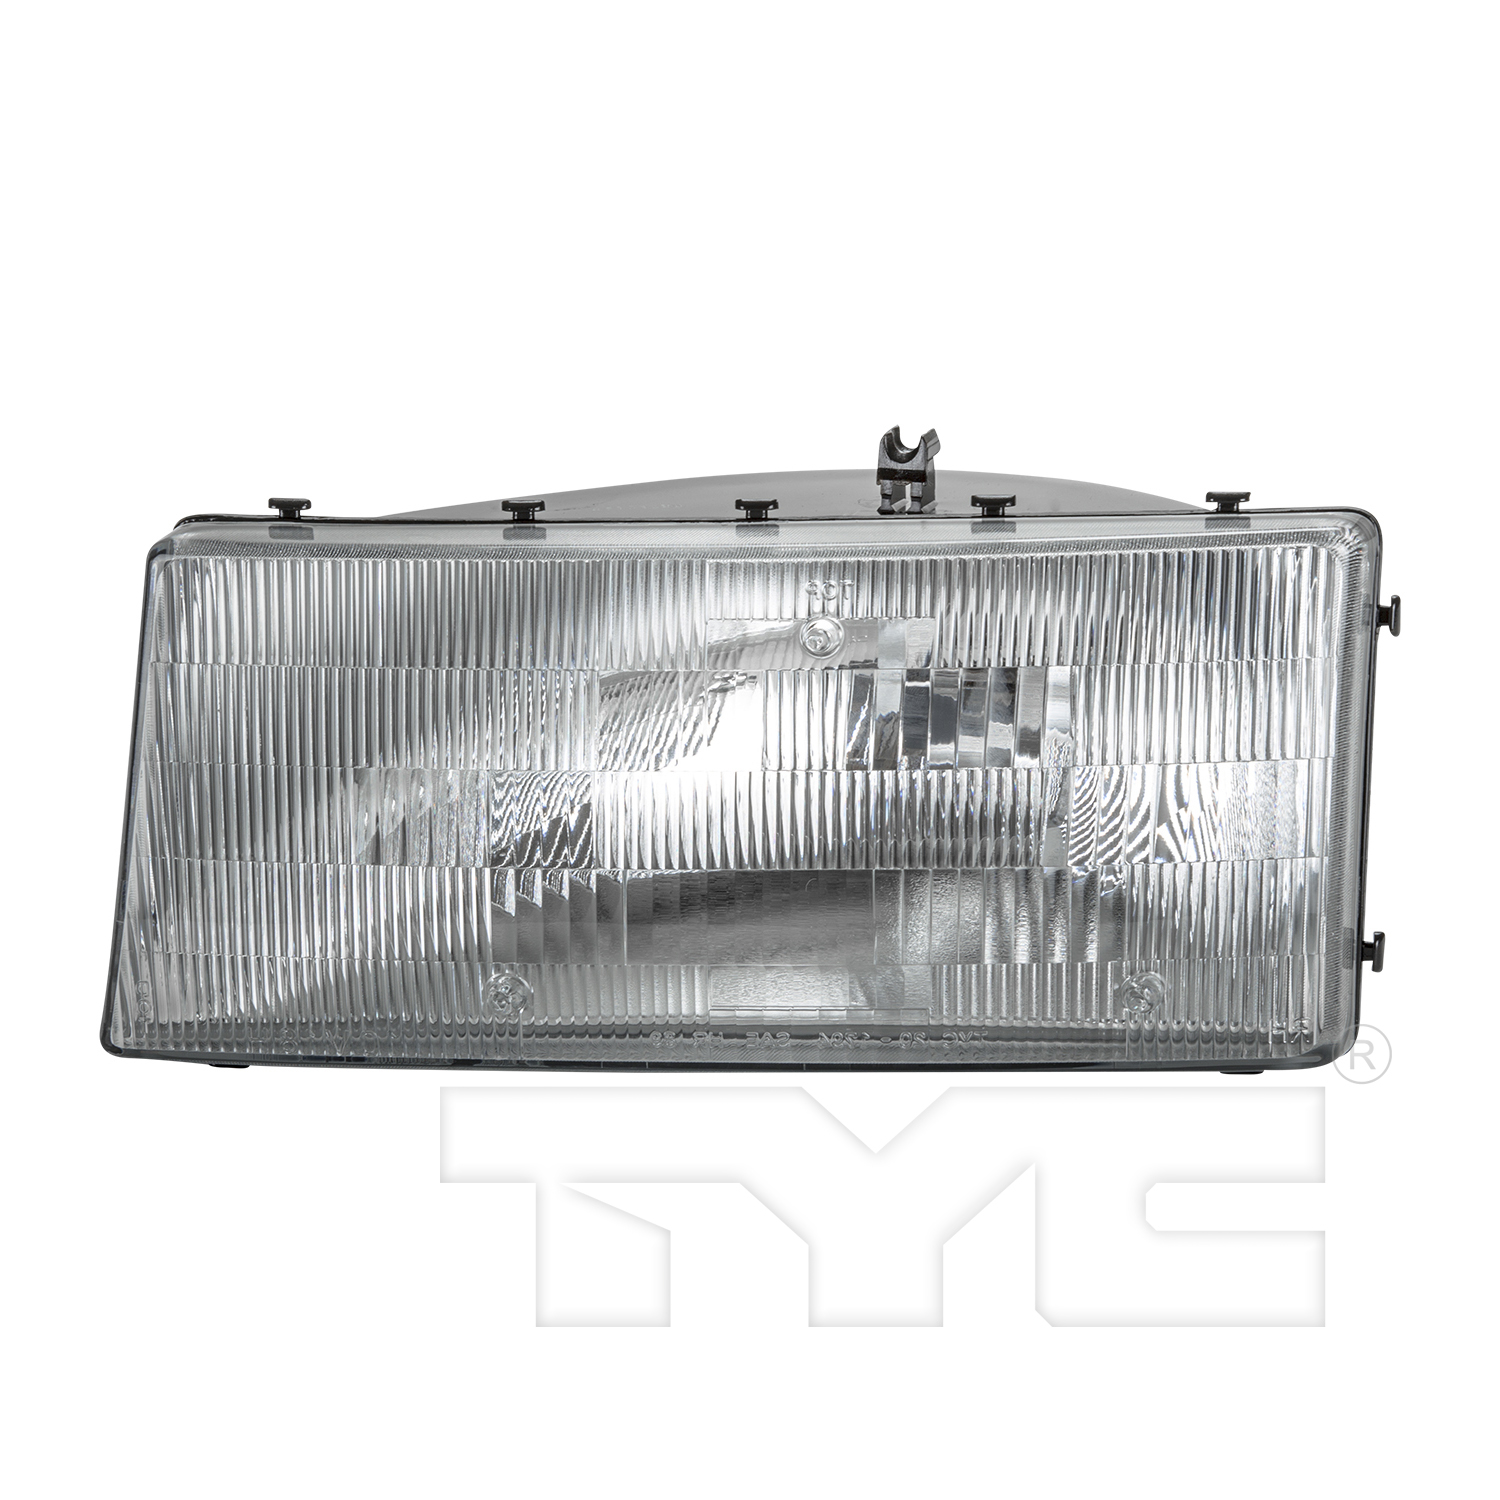 Aftermarket HEADLIGHTS for PLYMOUTH - ACCLAIM, ACCLAIM,89-94,LT Headlamp lens/housing